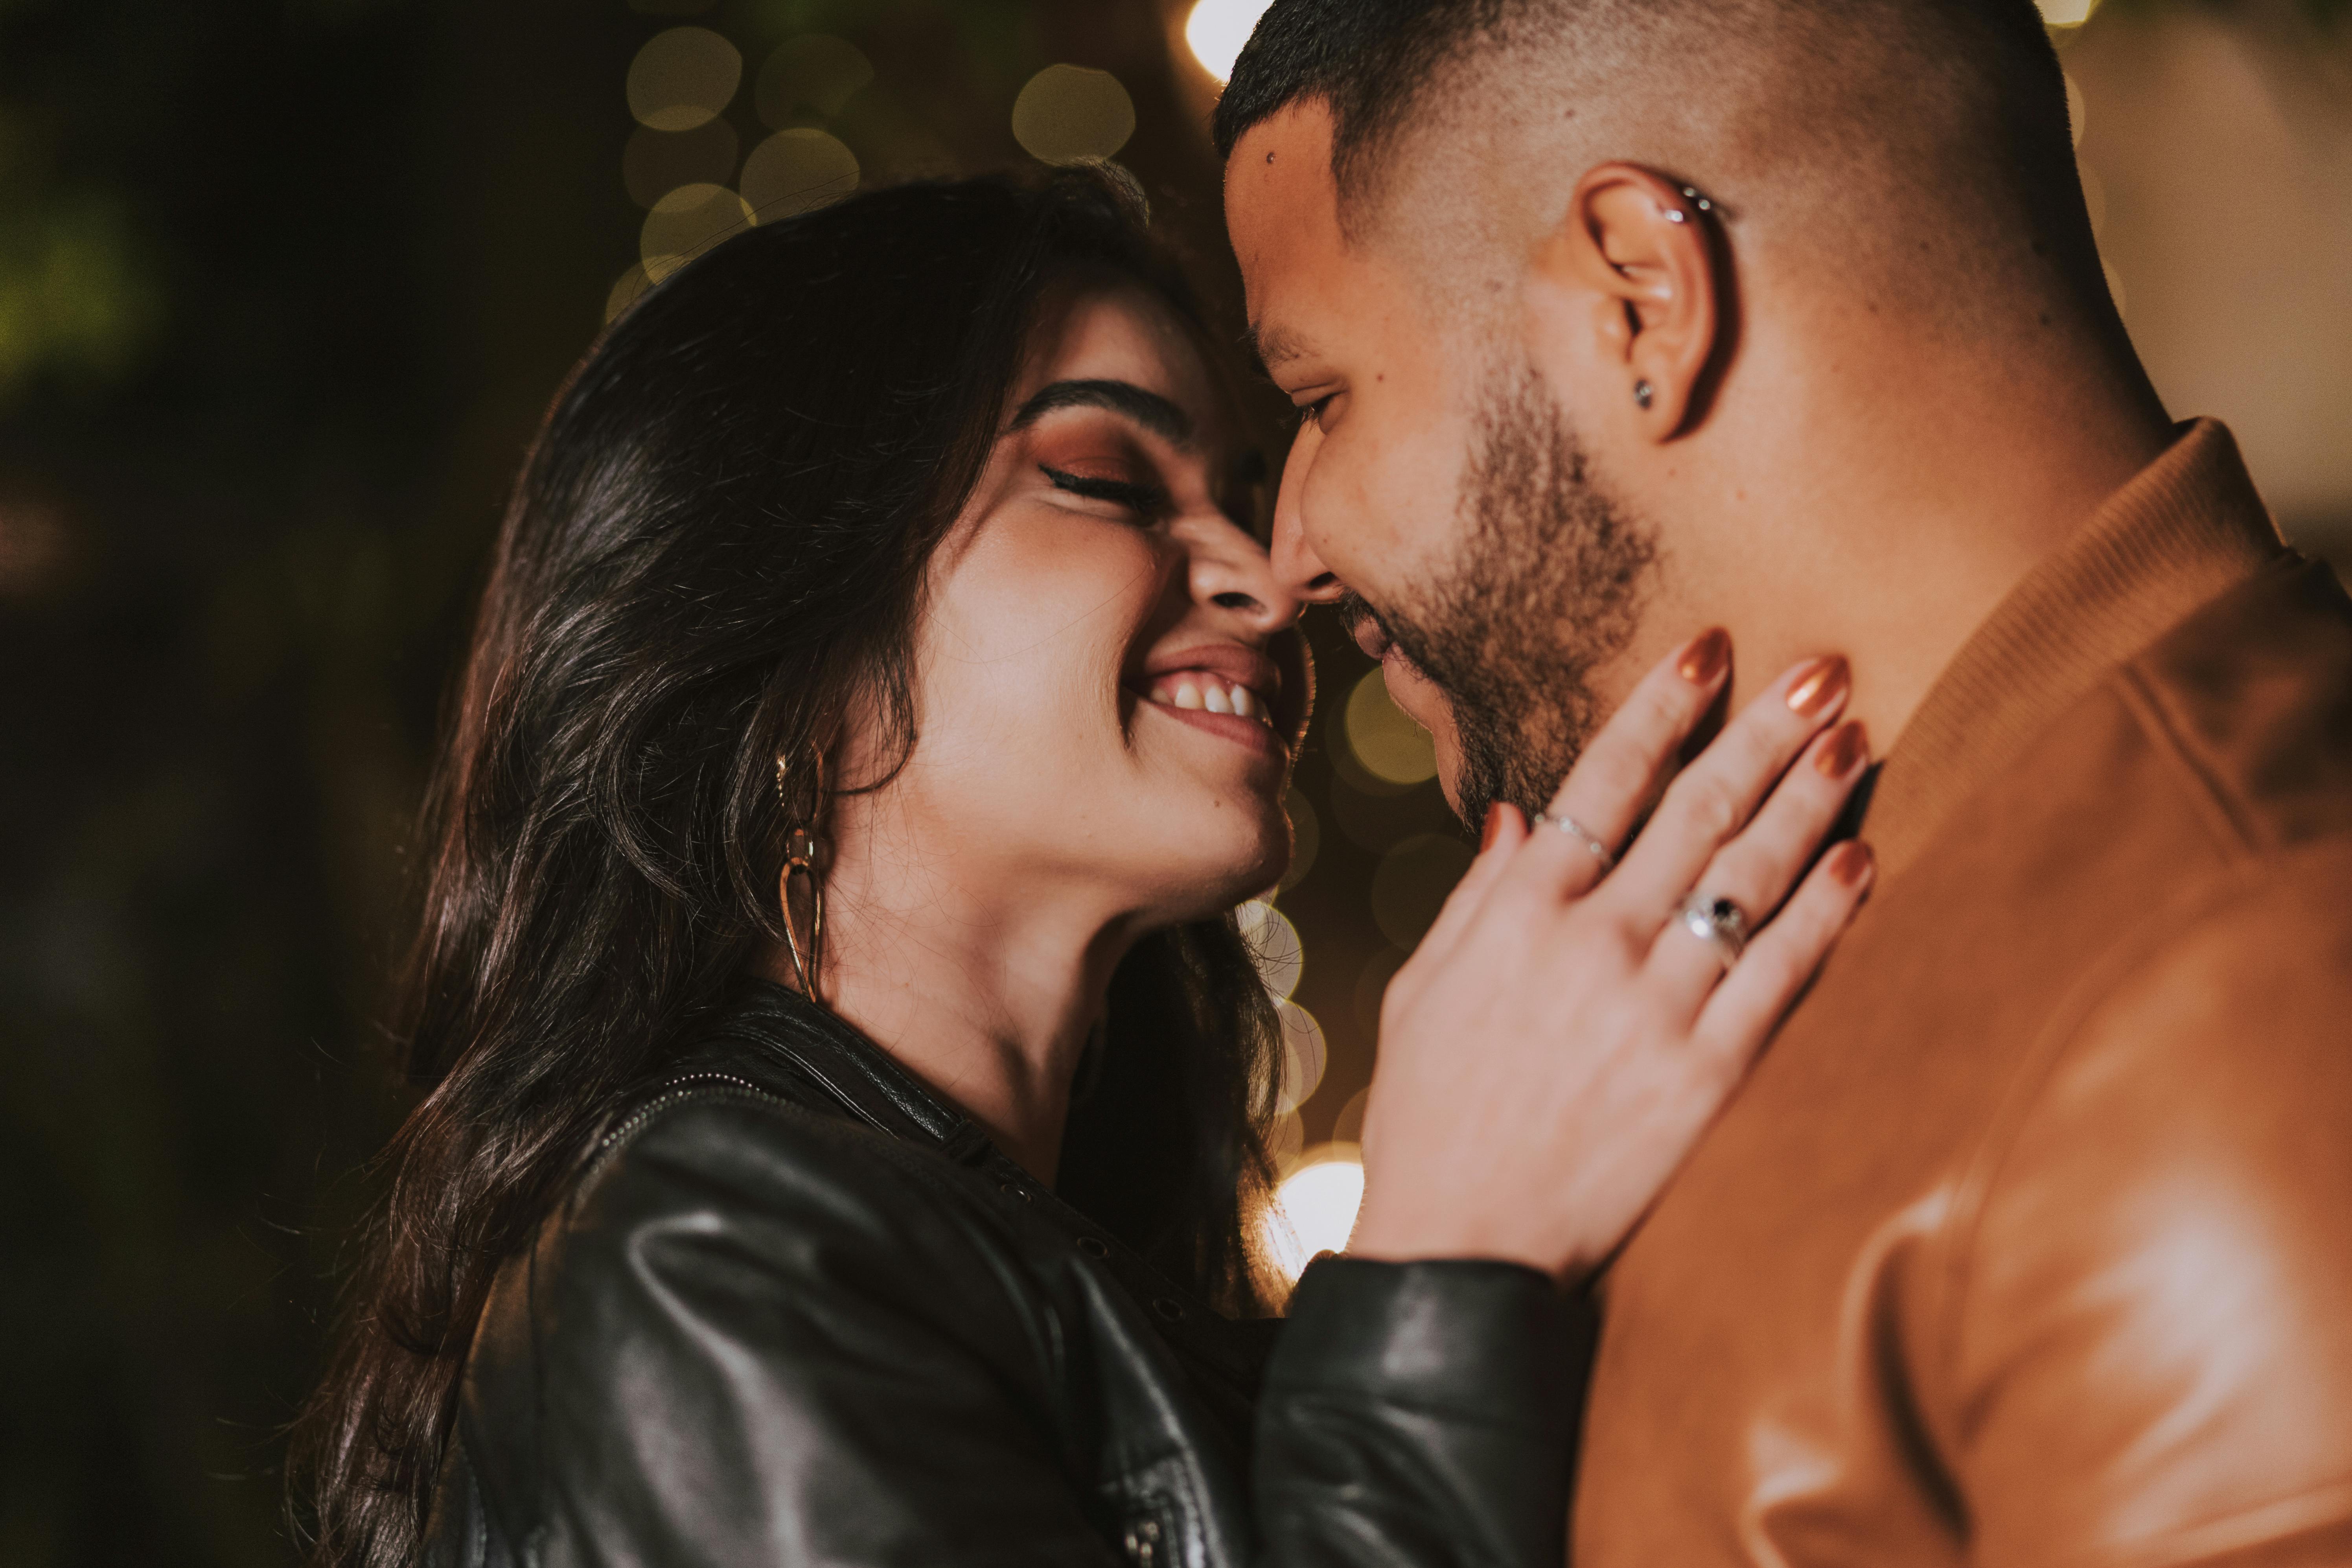 https://images.pexels.com/photos/16956634/pexels-photo-16956634/free-photo-of-couple-standing-face-to-face-and-embracing.jpeg